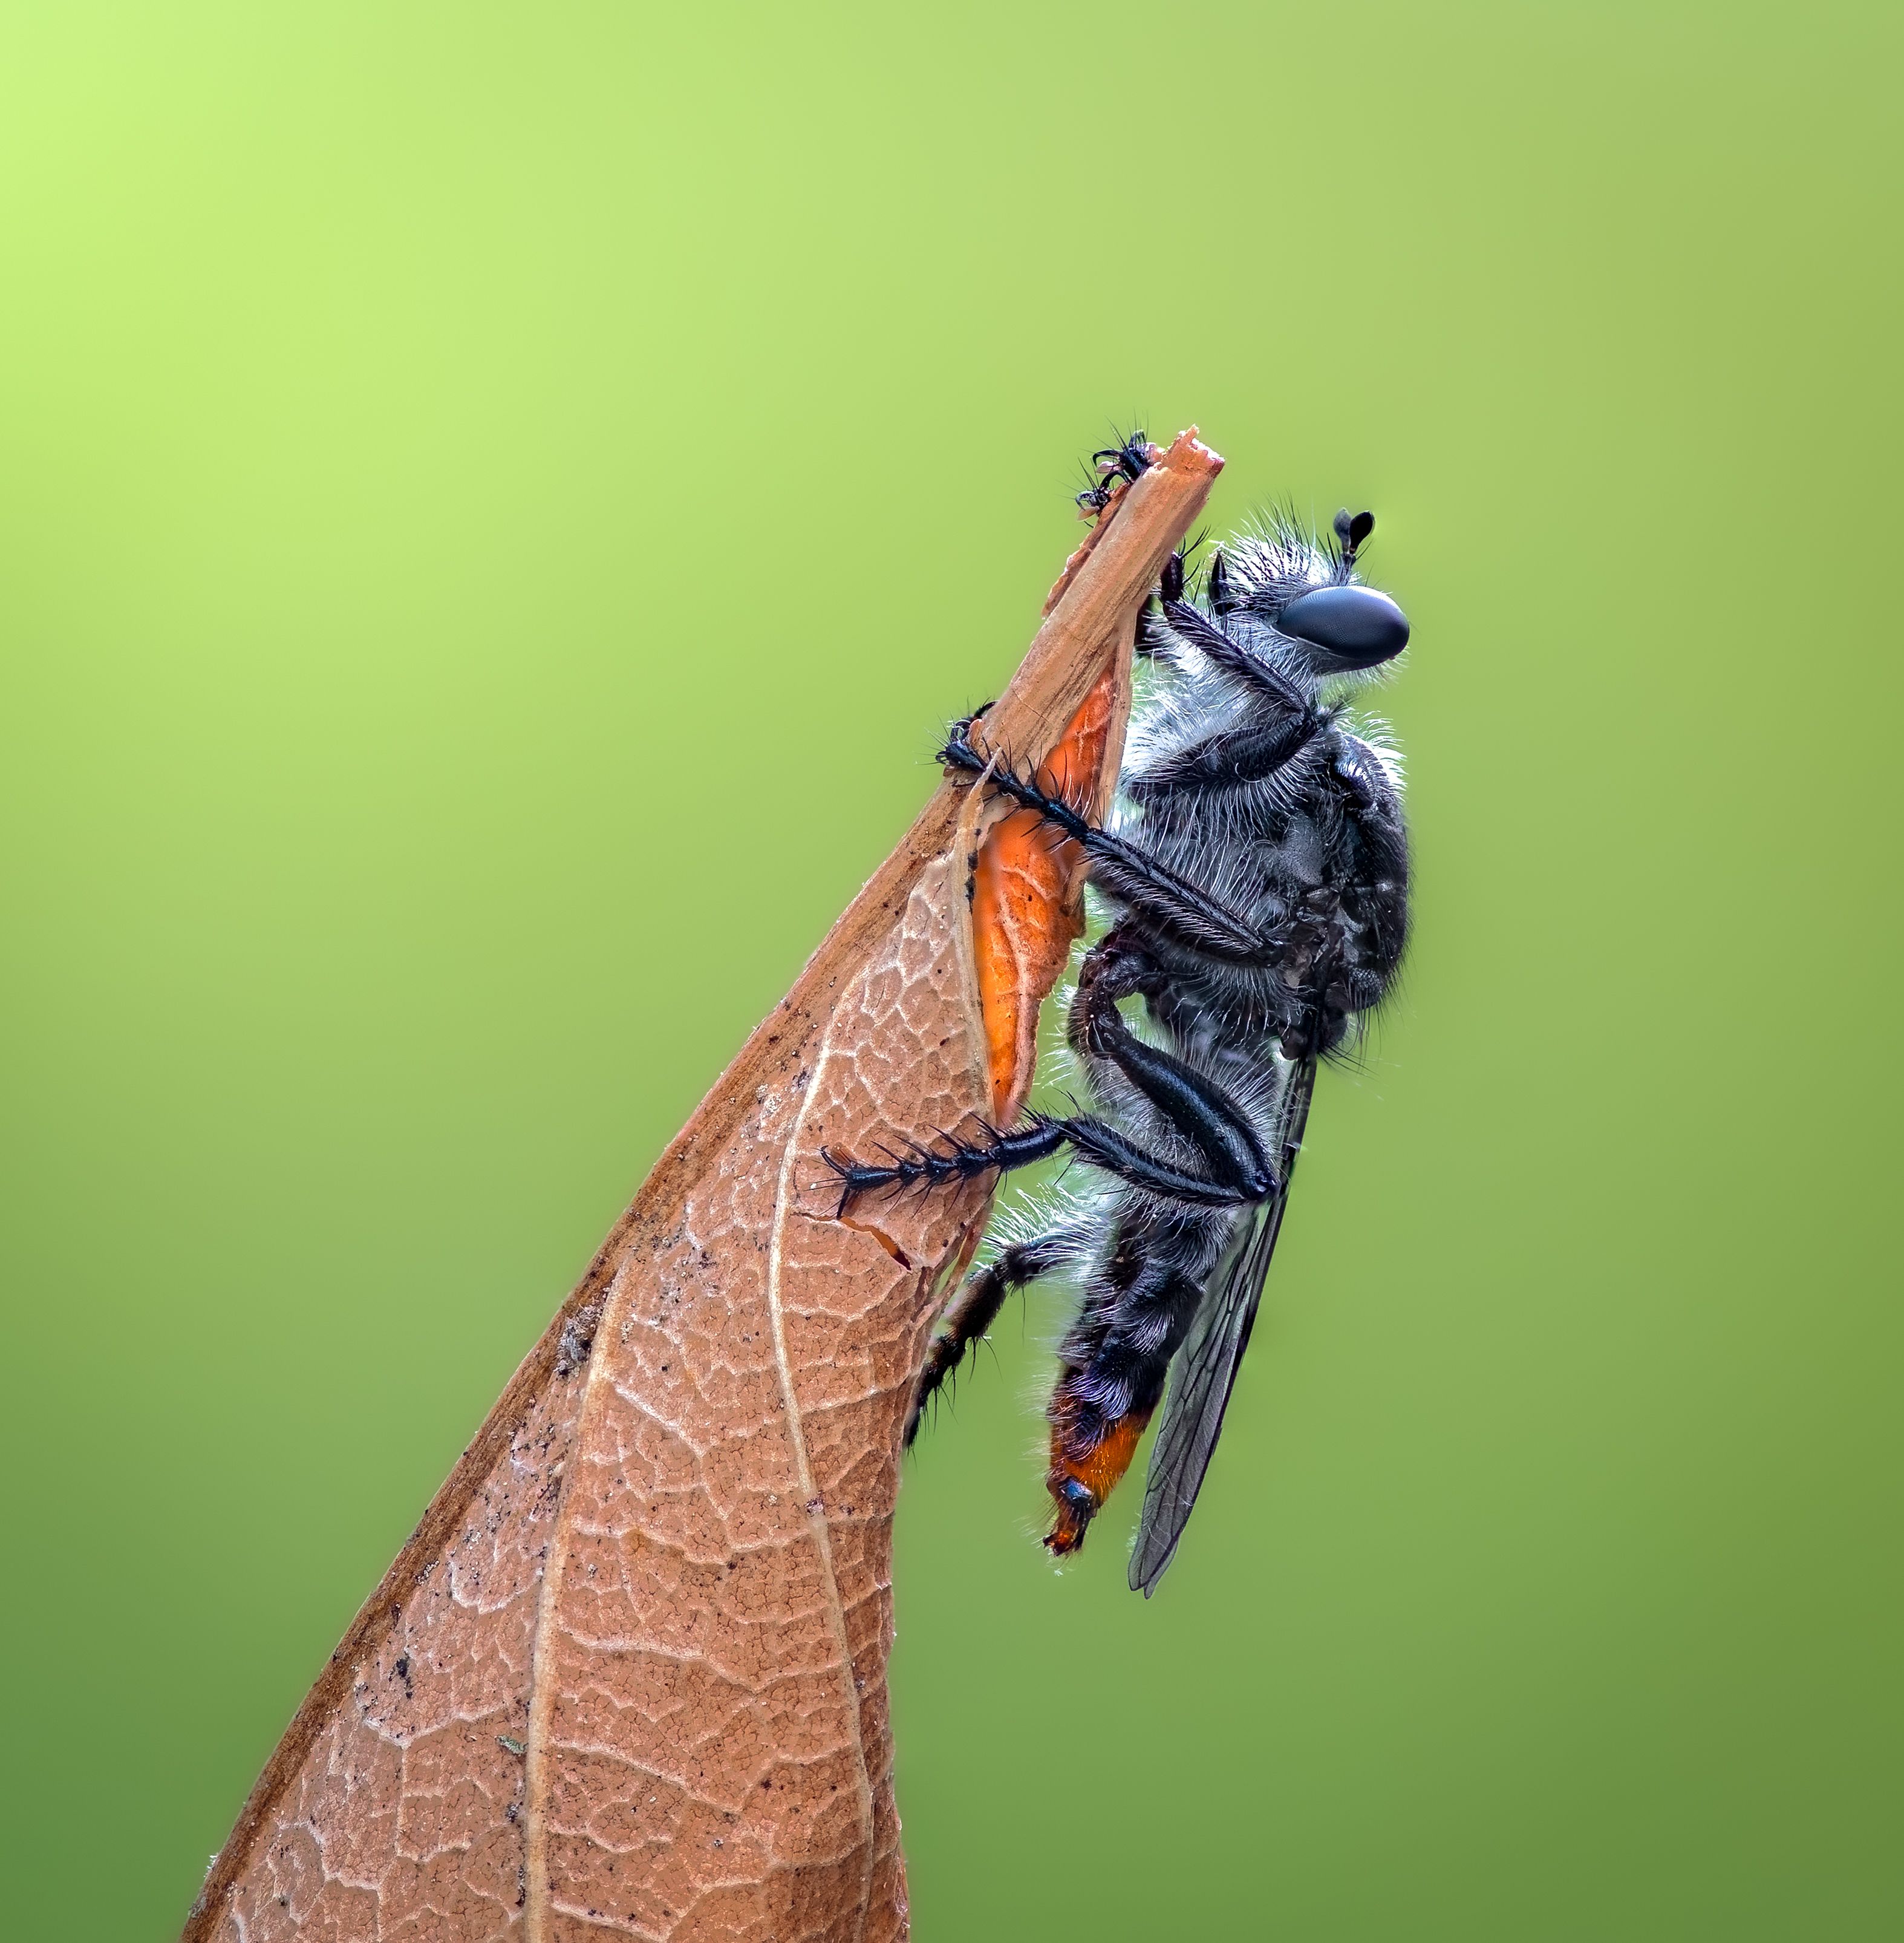 robber fly, insect, leaf, tiger fly, macro, bug, nature wild, robber fly, robber,, Atul Saluja